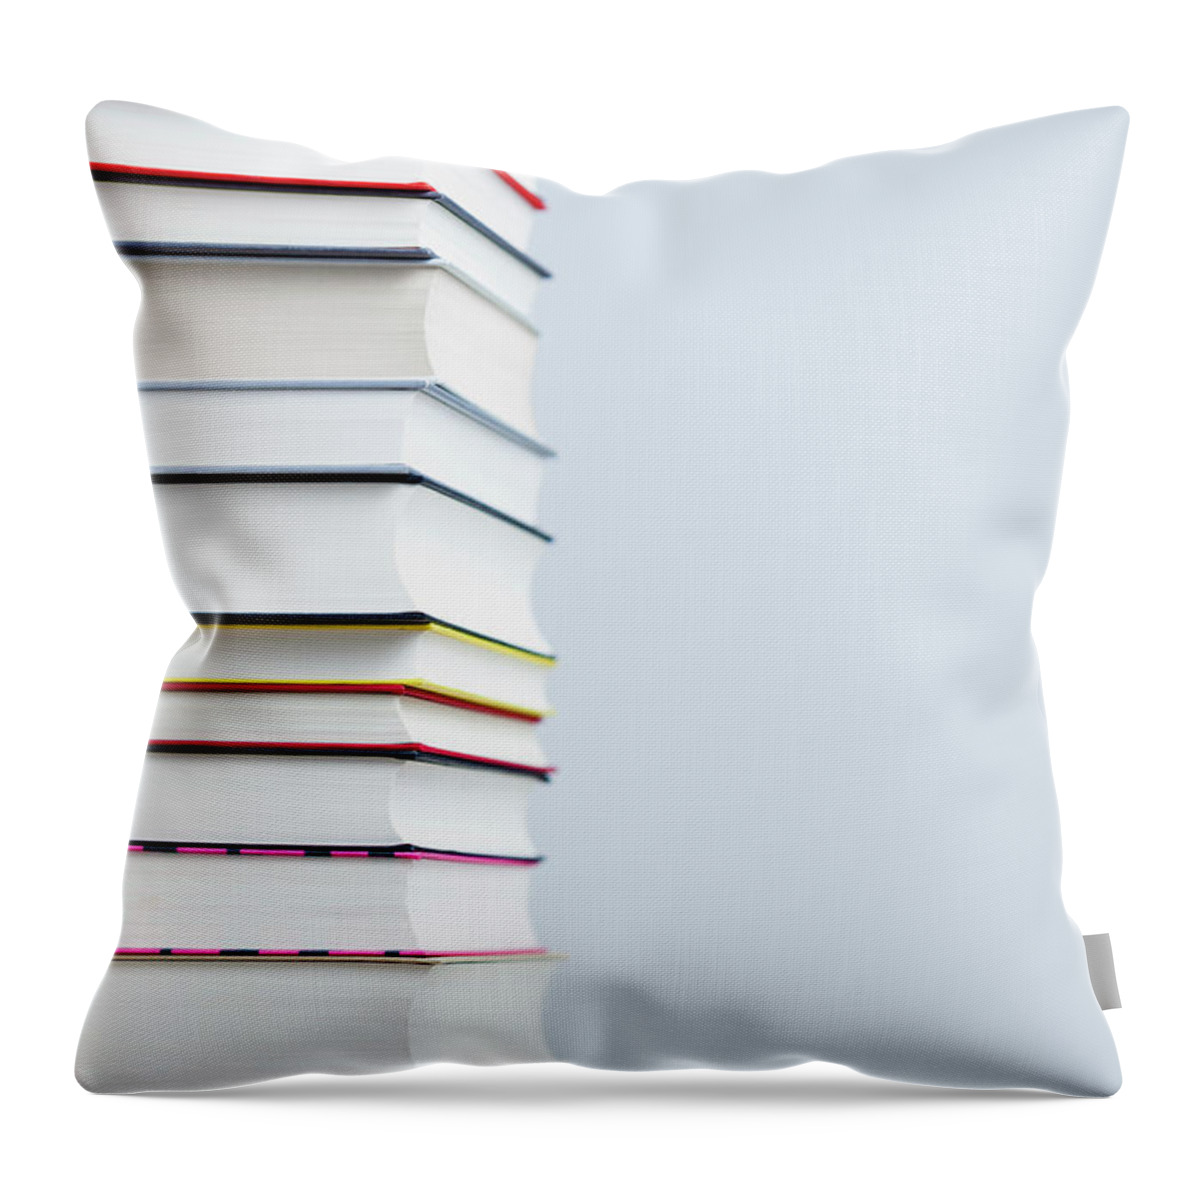 Large Group Of Objects Throw Pillow featuring the photograph A Stack Of Books #1 by Jorg Greuel